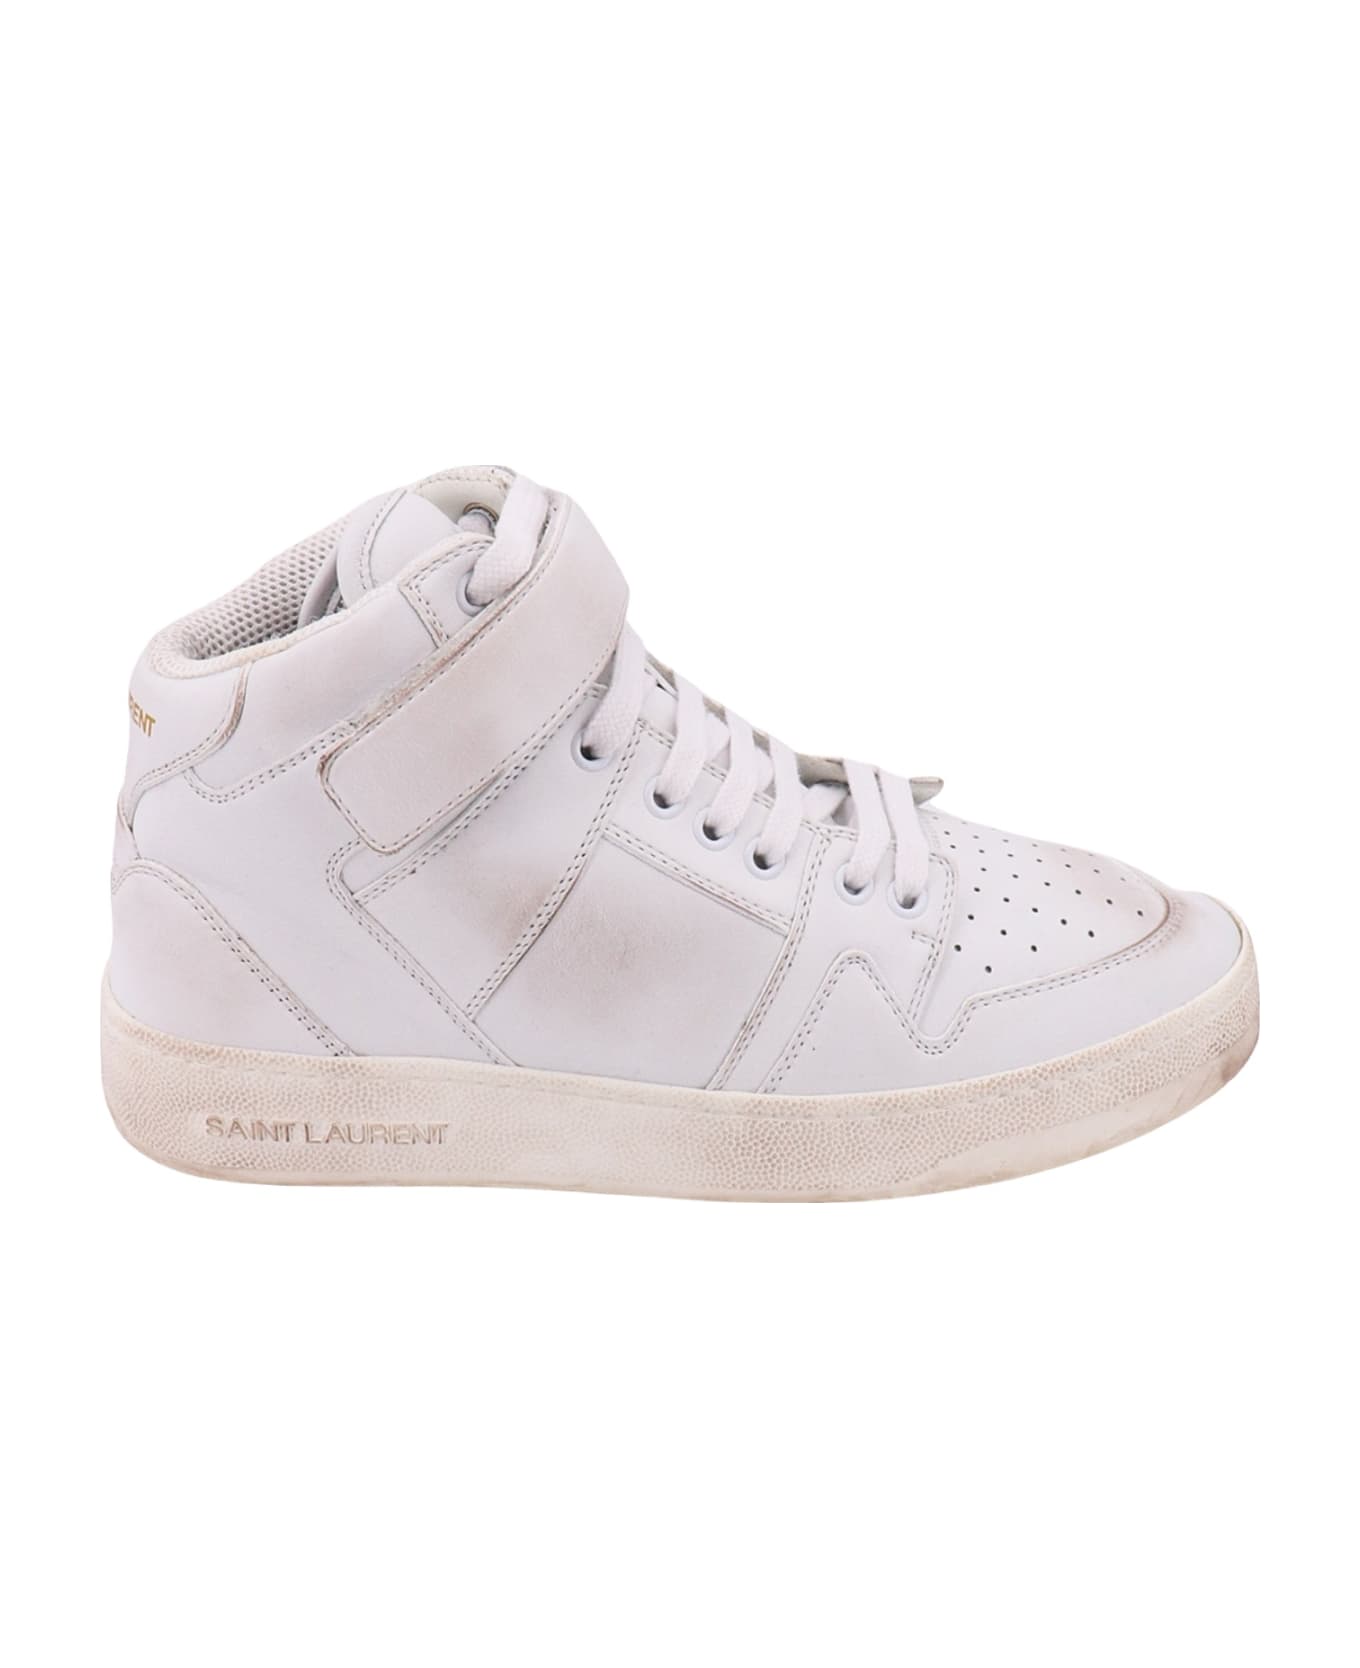 Saint Laurent Lax Sneakers In Washed-out Effect Leather - White スニーカー